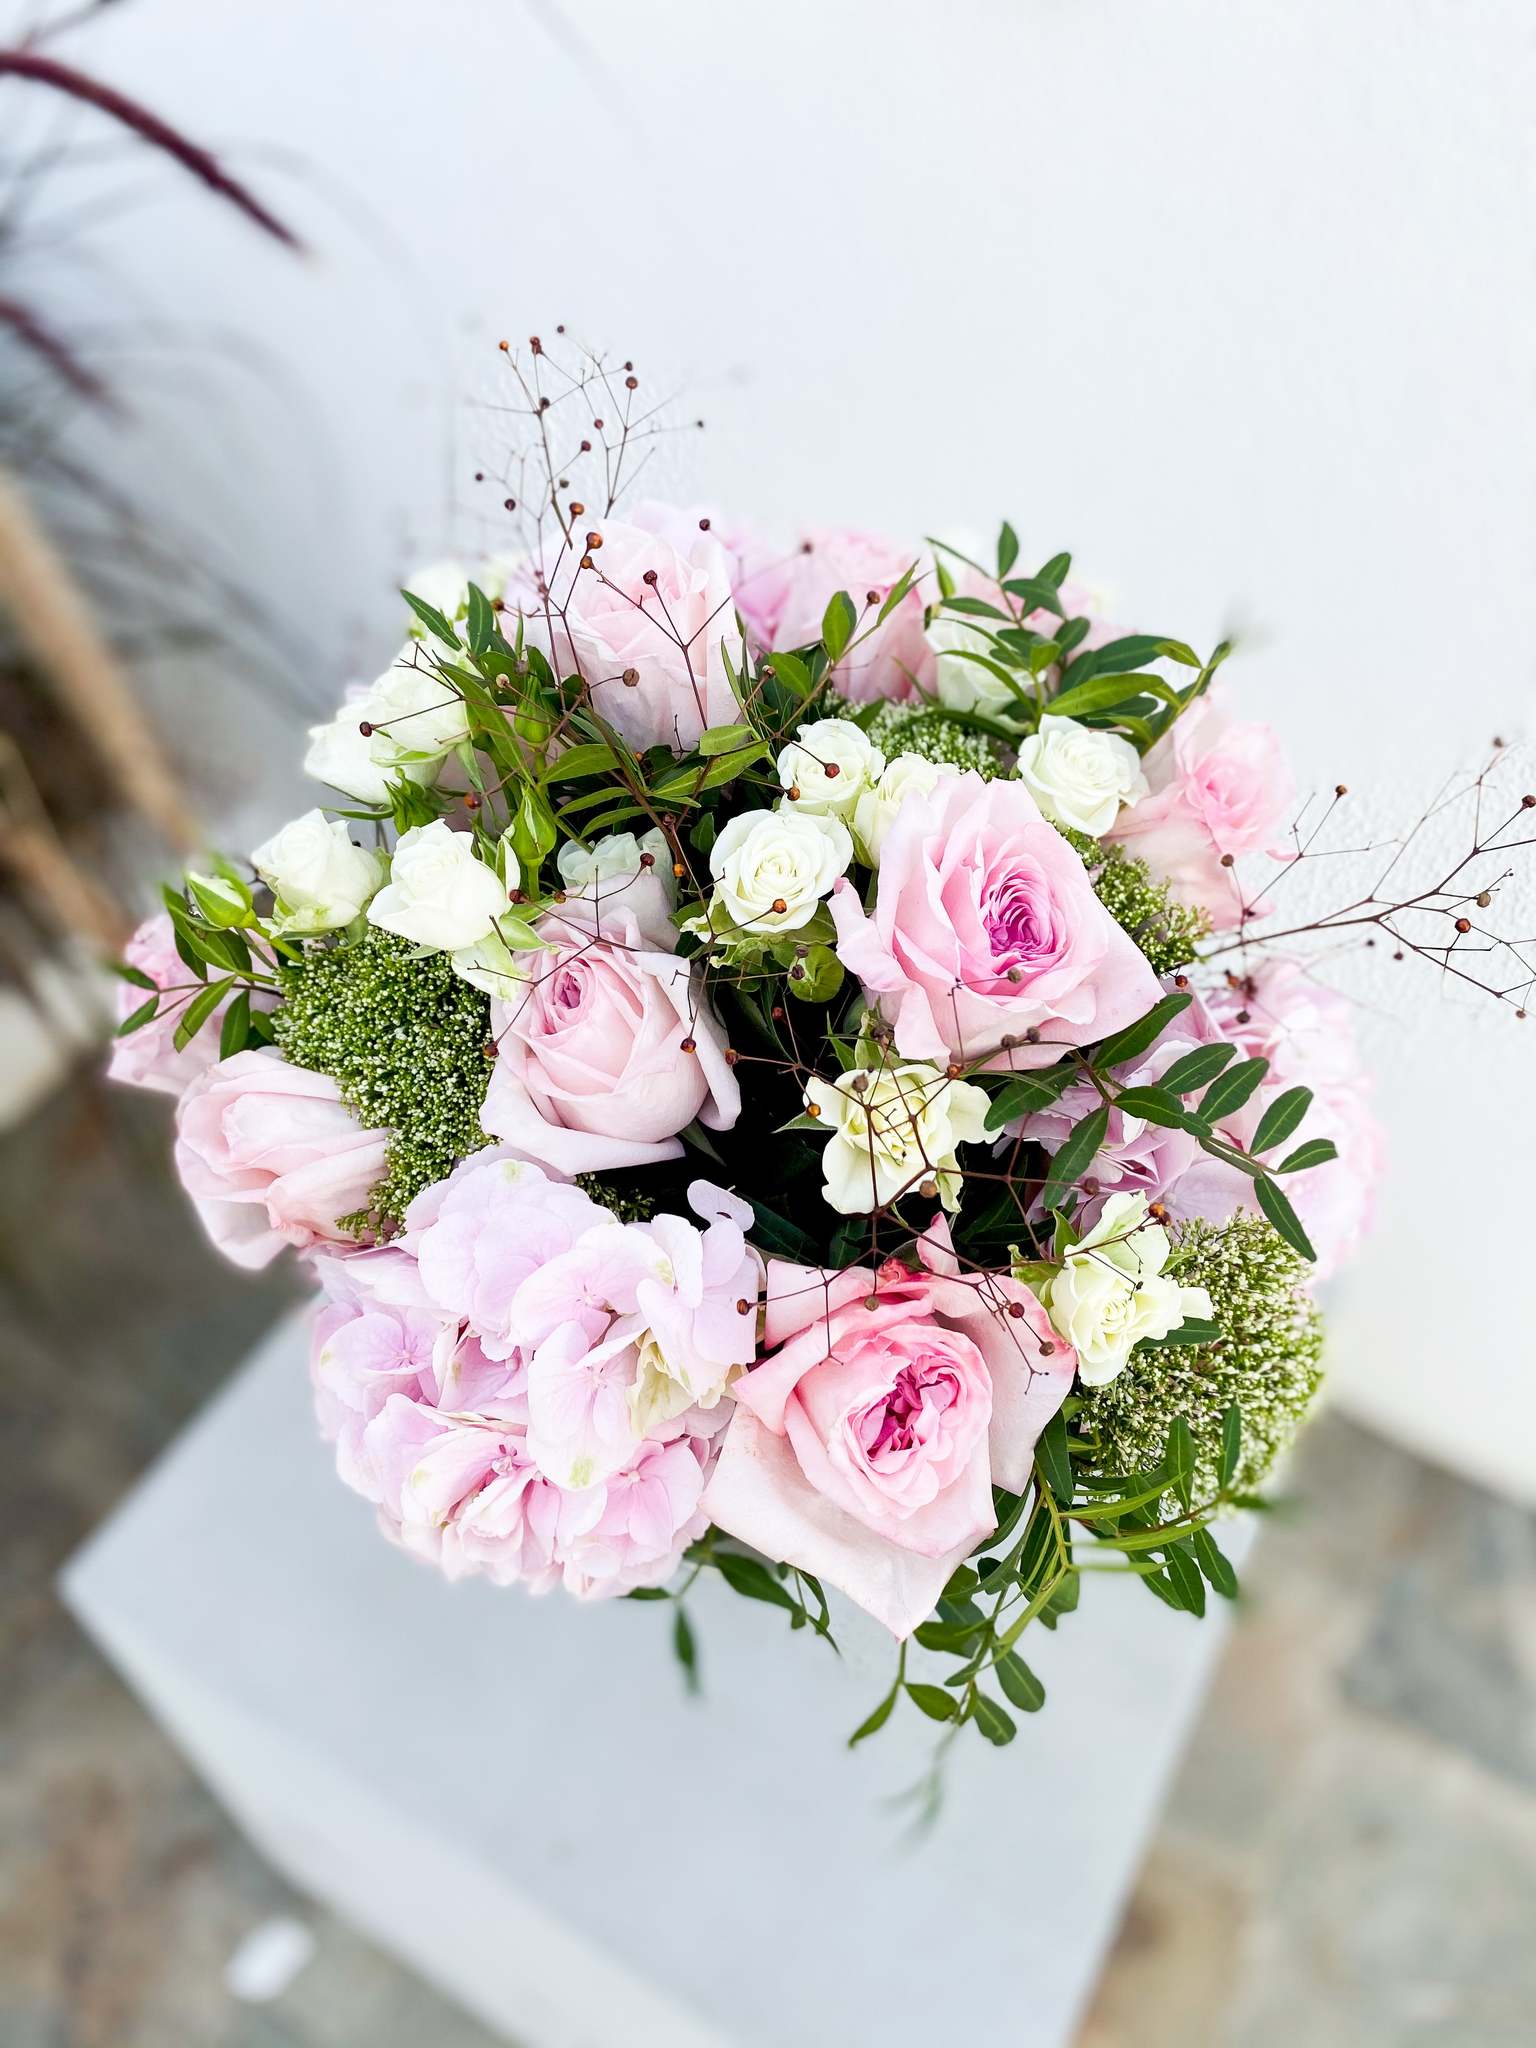 Alix bouquet by Margot Floral Design. A fresh flower bouquet composed of Pink Hydrangeas, Baby Pink O'Hara Roses, White O'Hara Roses, and Foliage. Large size.